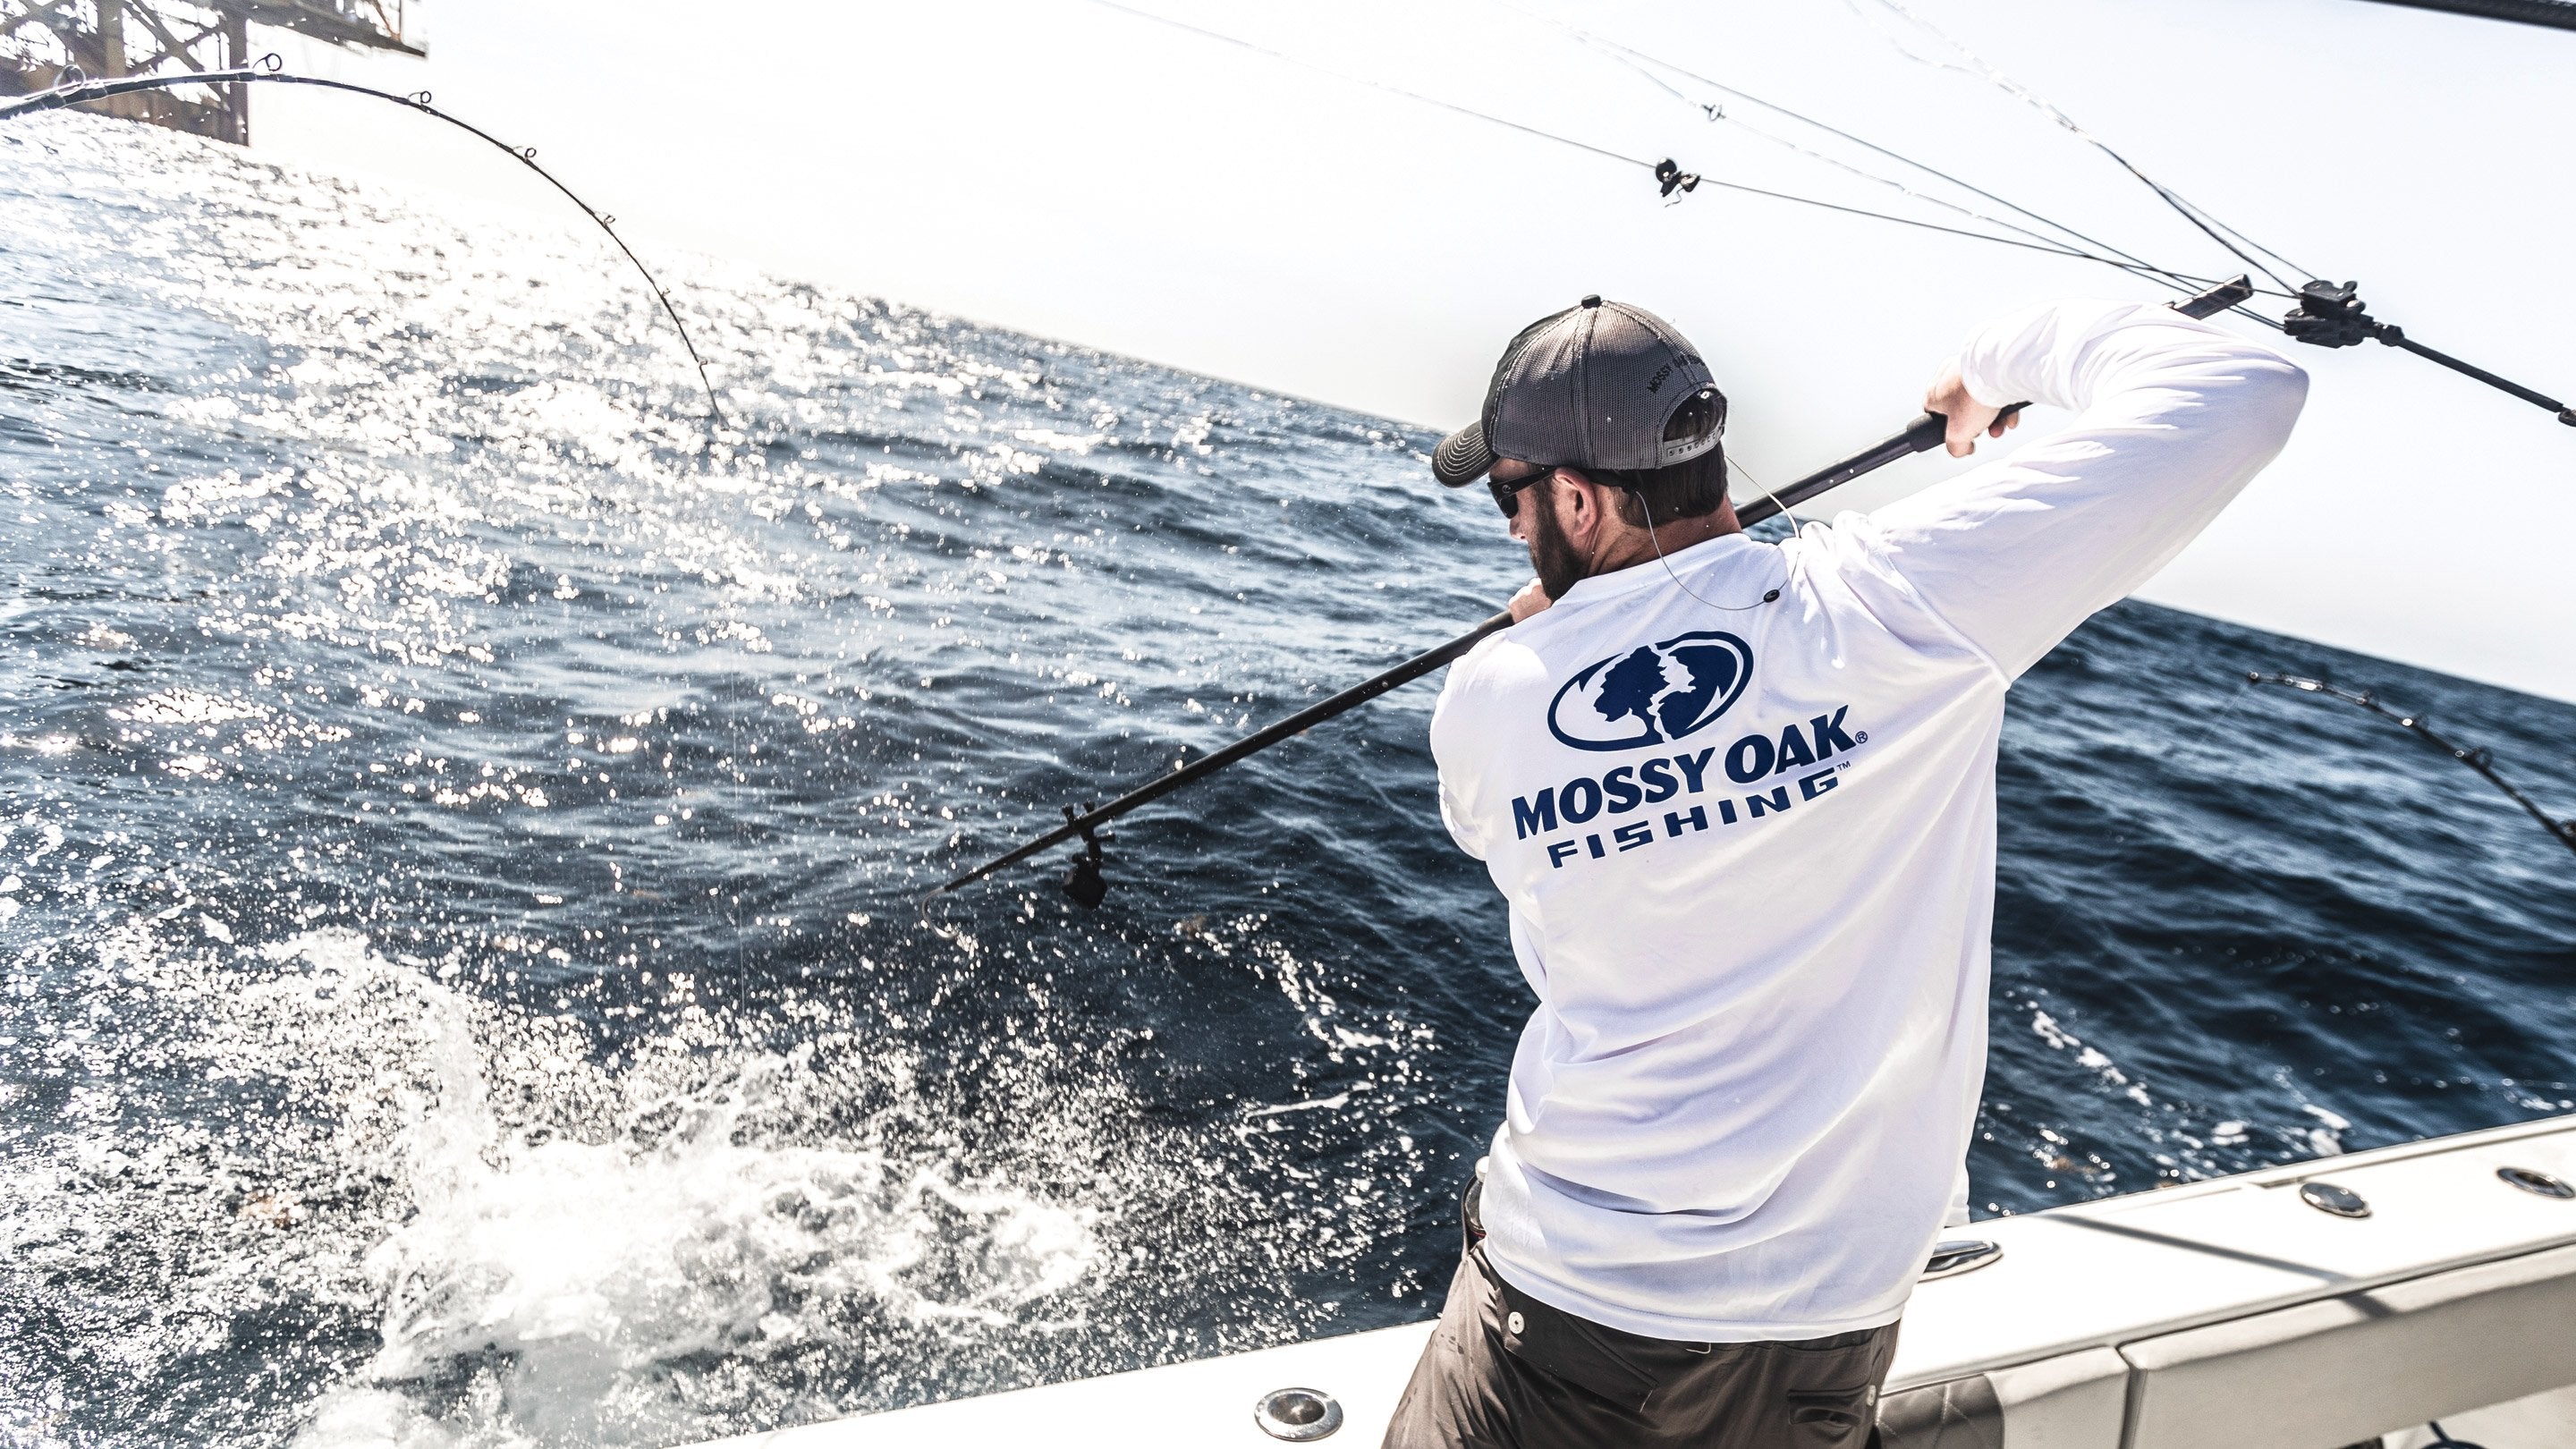 Performance Fishing Apparel & Shirts with UPF Sun Protection – The